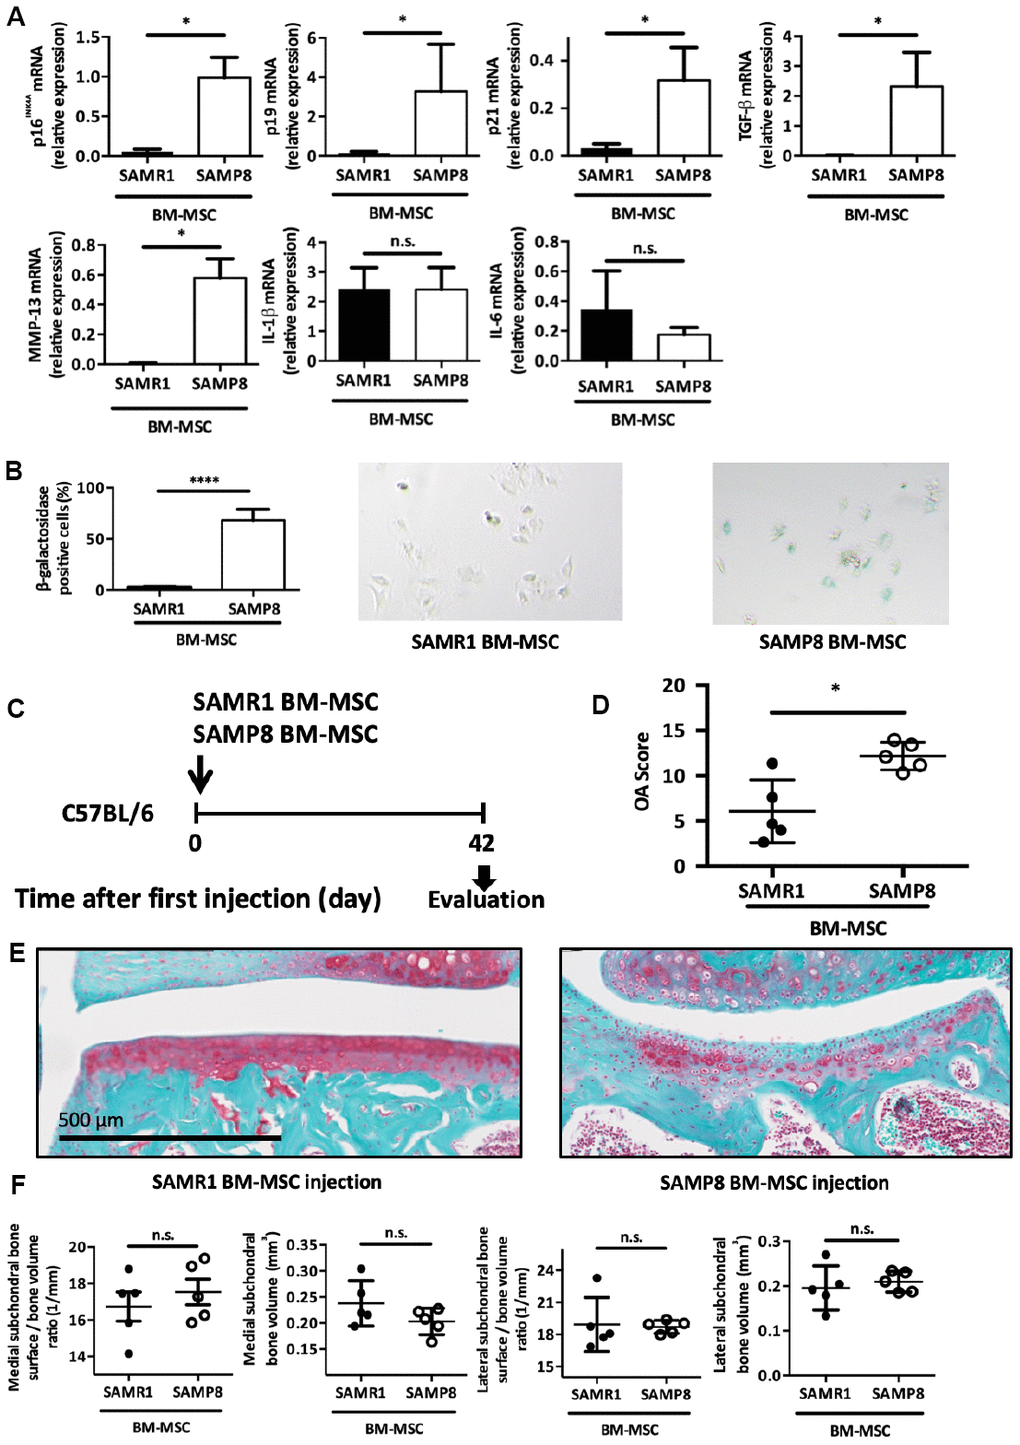 Intra-articular injection of senescent MSCs induces OA-like cartilage degradation. (A) p16INK4A, p19ARF, p21cdkn1a, TGF-β, MMP-13, IL-1β and IL-6 mRNA expression in MSCs derived from bone marrow (BM) of 6-month-old SAMP8 or SAMR1 mice by RT-qPCR. Data are the mean ± SEM (n=3 for each conditions); *=pB) Beta-galactosidase staining in MSCs derived from BM of SAMP8 or SAMR1 mice. Data are the mean ± SEM (n=5); ****=pC) Experimental design of BM-MSC injection in the knee of 2-month-old C57BL/6JRj mice. (D) Cartilage degradation (OA modified score according to van den Berg, from 0 to 30, after Safranin-O/Fast Green staining) at day 42 after SAMP8 or SAMR1 BM-MSC intra-articular injection. Data are the mean ± SEM (n = 5 for both conditions); *=pE) Representative images of cartilage degradation in a C57BL/6JRj mouse after SAMP8 or SAMR-1 BM-MSC injection. (F) Histo-morphometric analyses by micro-CT of the left knee (medial and lateral compartment) at day 42 after injection of SAMR1 or SAMP8 BM-MSCs. Data are the mean ± SEM (n = 5 for each condition).